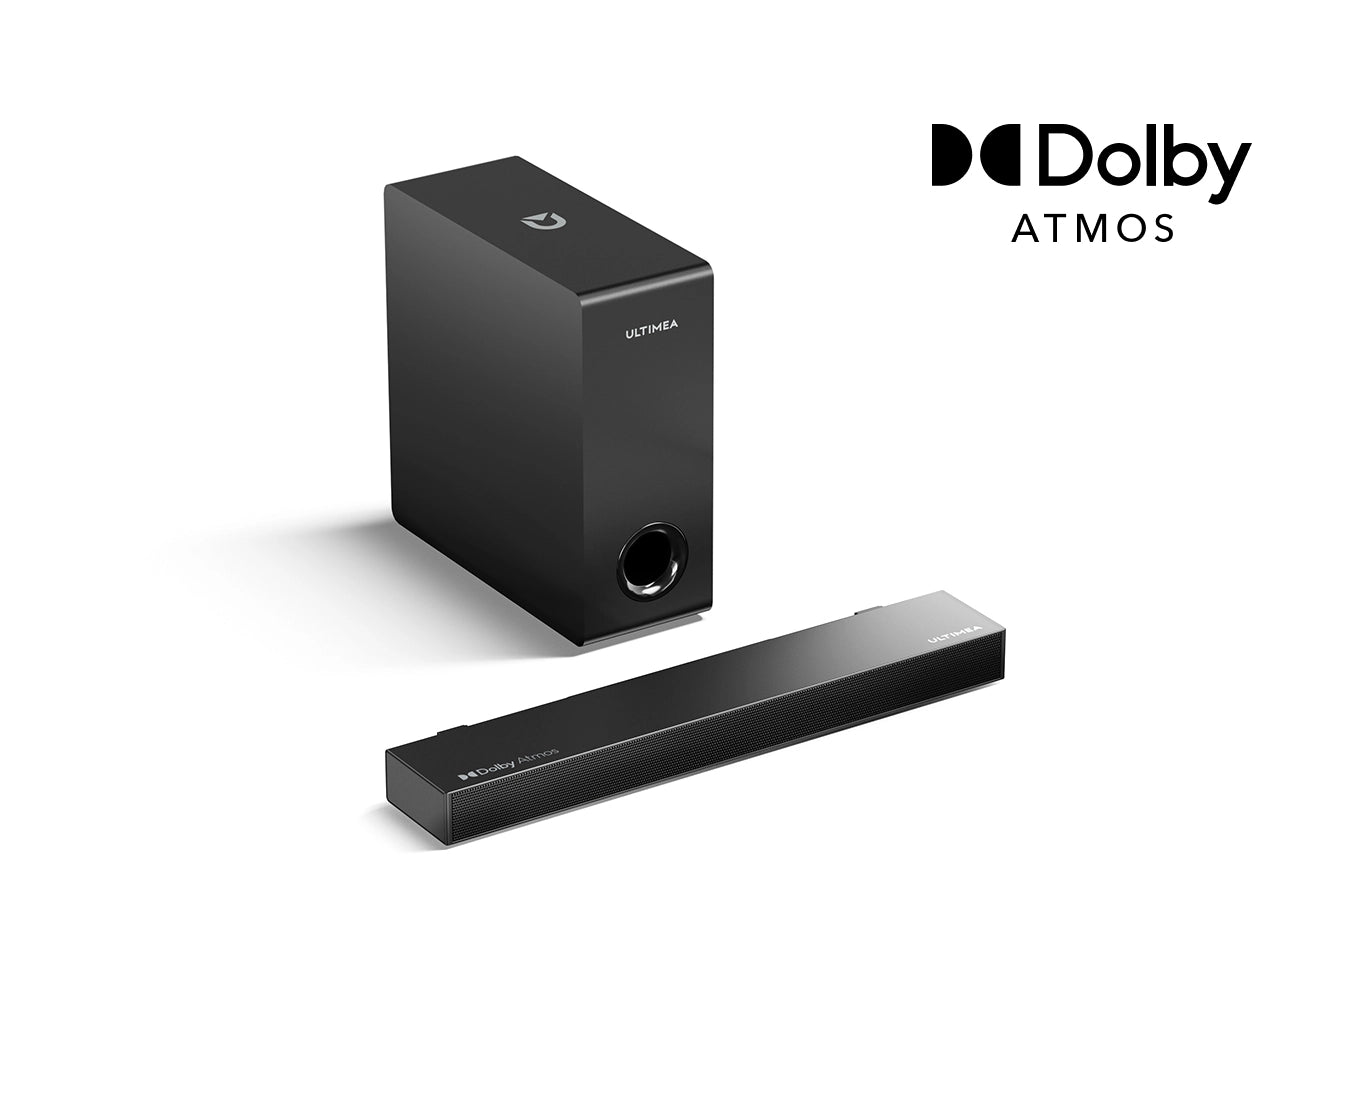  ULTIMEA 5.1 Dolby Atmos Sound Bar, Peak Power 410W, Sound Bar  for Smart TV with Subwoofer, 3D Surround Sound System for TV, Surround and  Bass Adjustable Home Theater, Poseidon D60 Series 